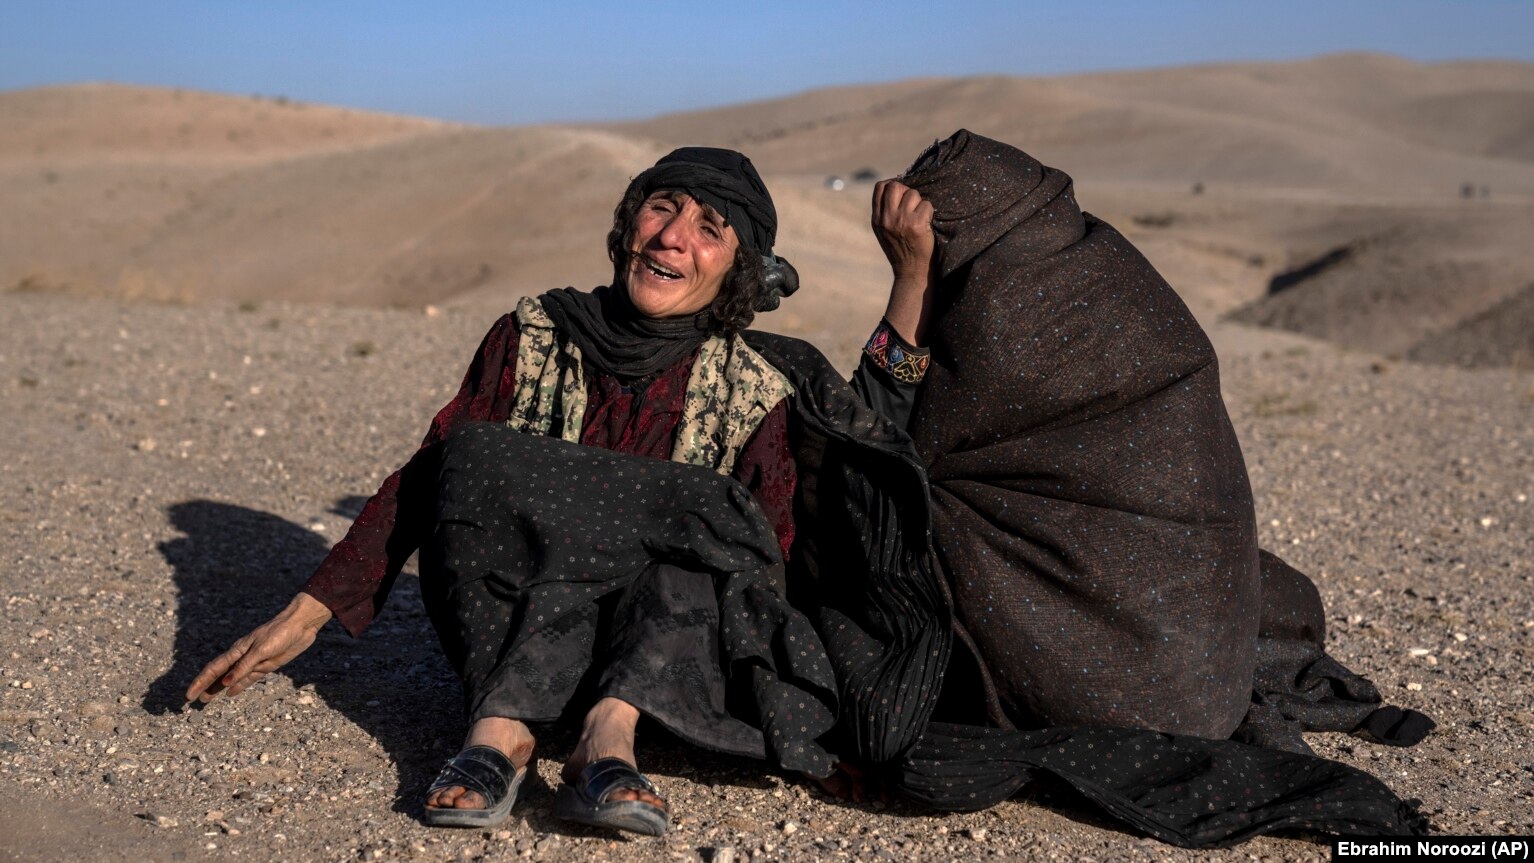 Afghan women mourn the death of relatives who were killed in the earthquakes.